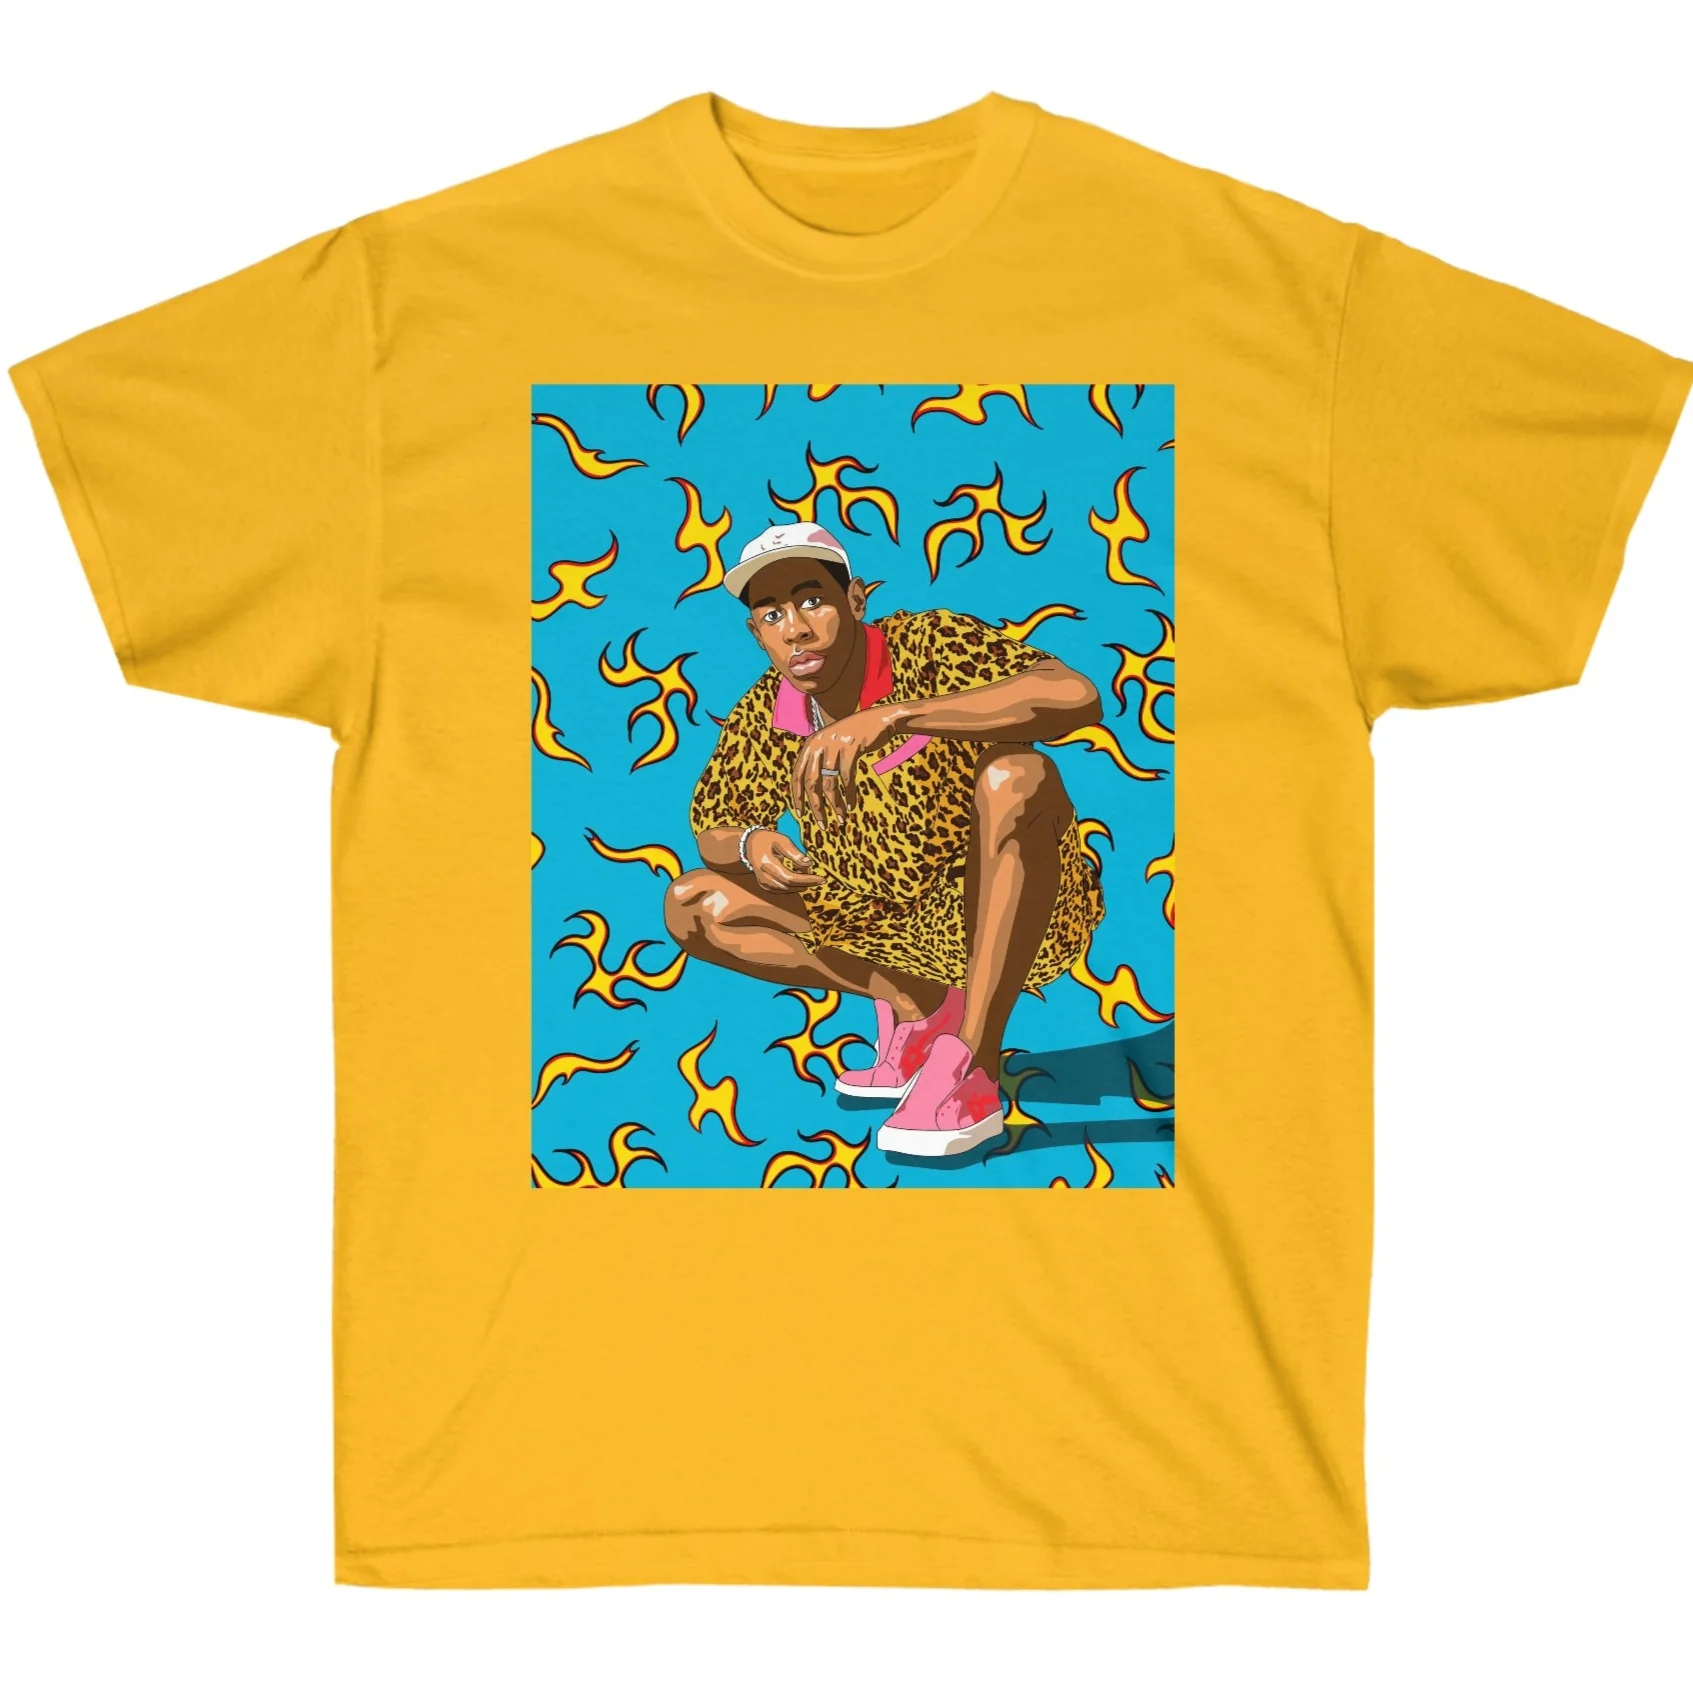 Stylish Statements: The Latest in Tyler, The Creator Merchandise